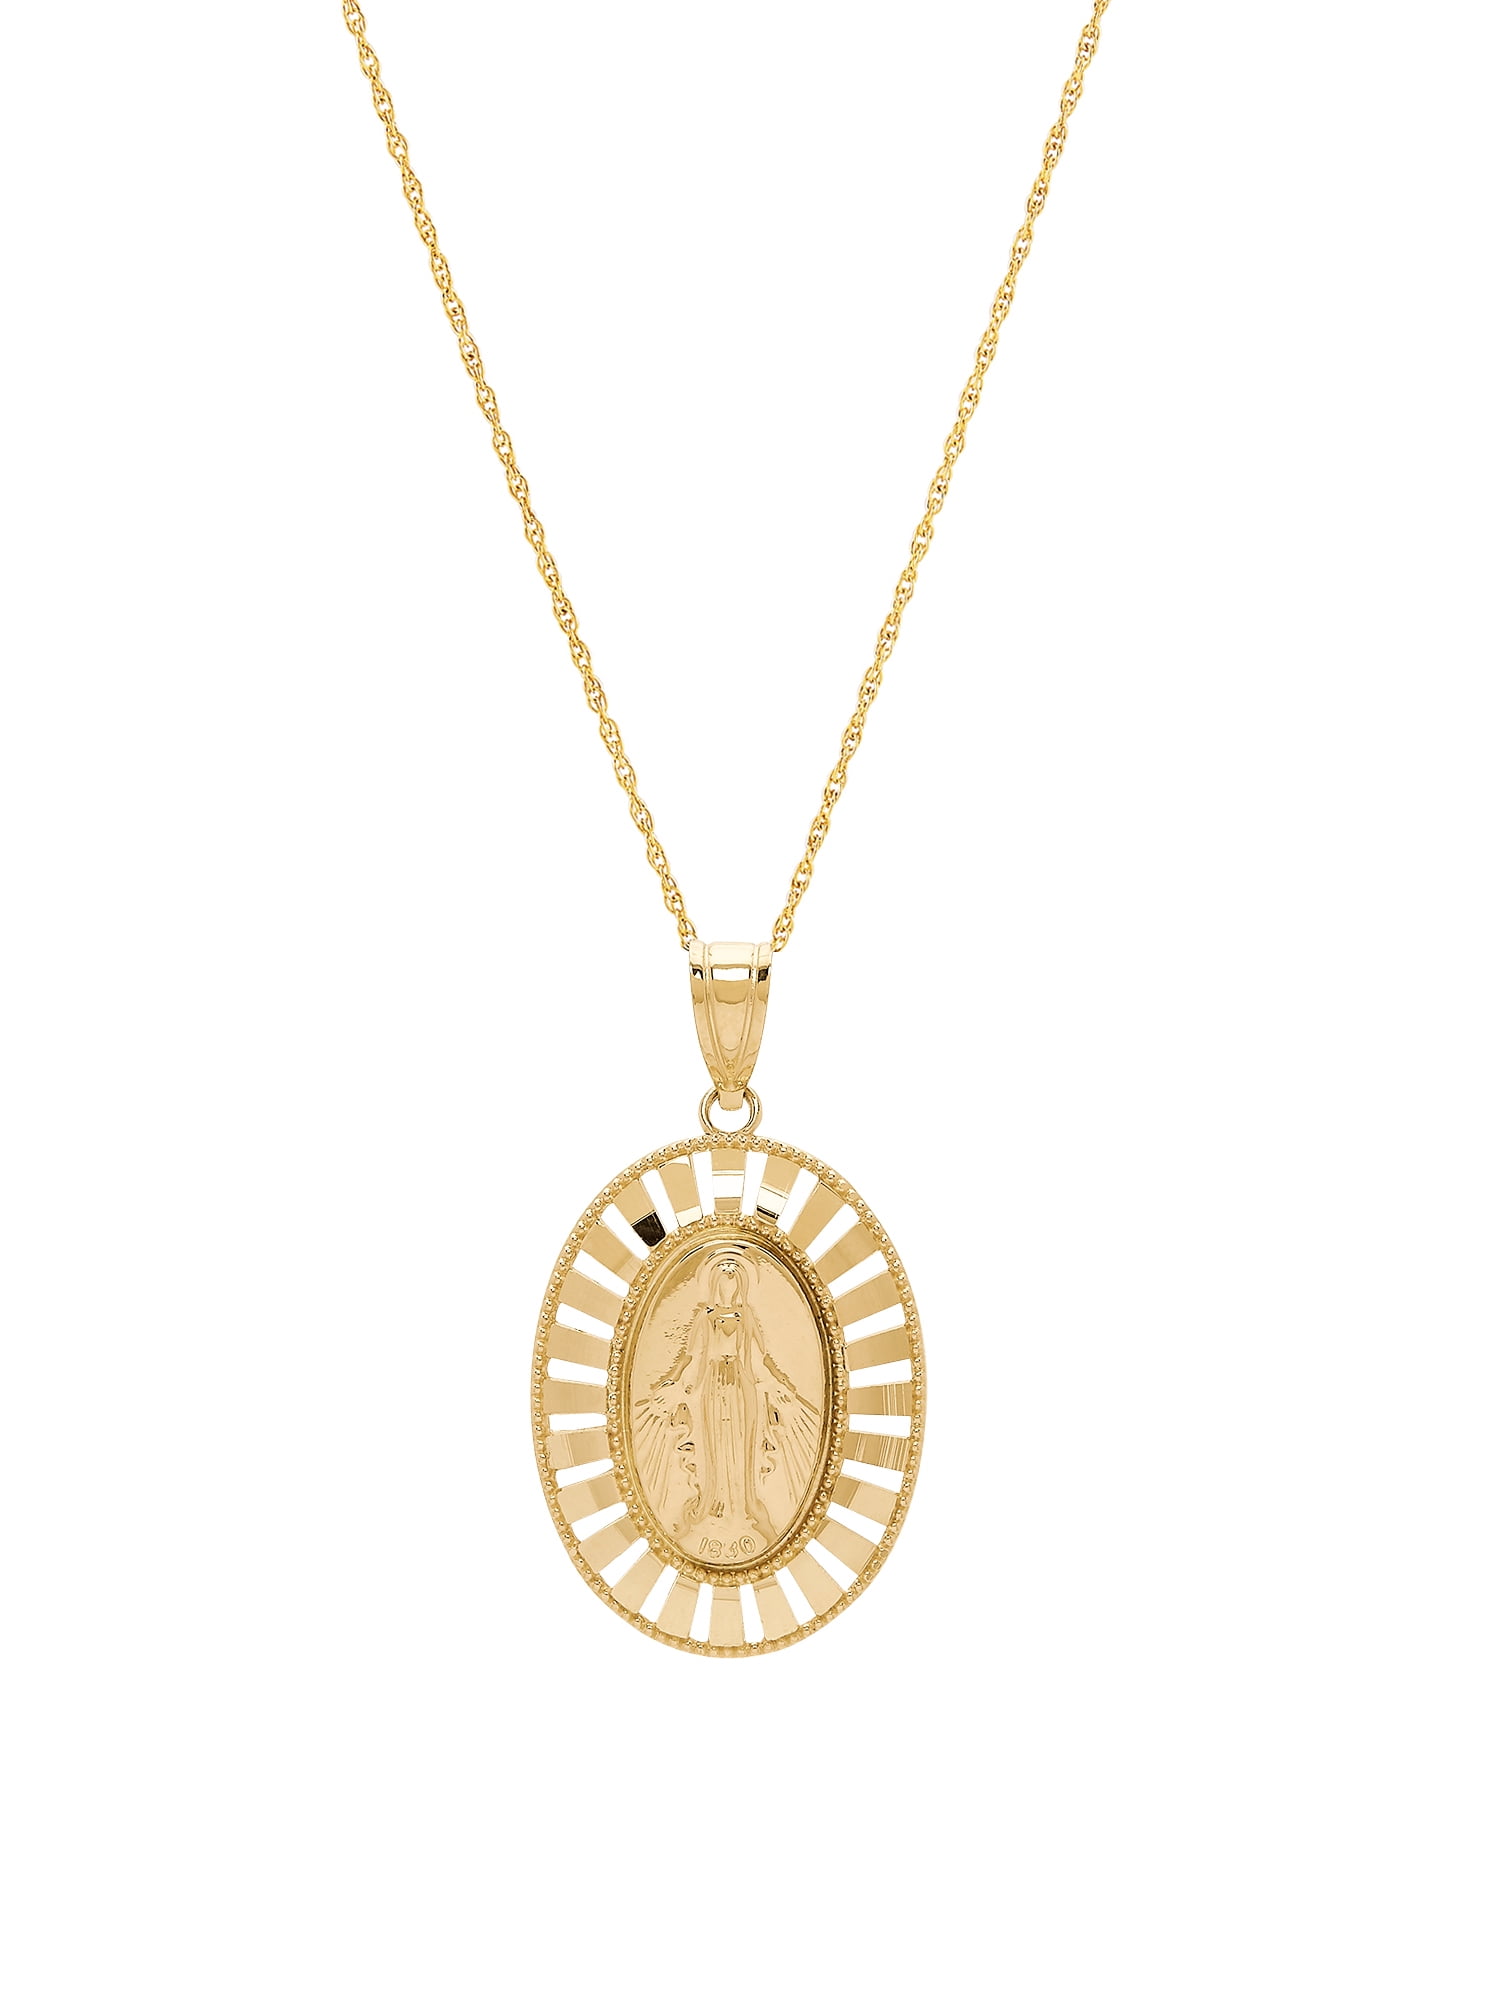 18-Inch Hamilton Gold Plated Necklace with 4mm Sapphire Birthstone Beads and Gold Filled Our Lady of Fatima Charm.